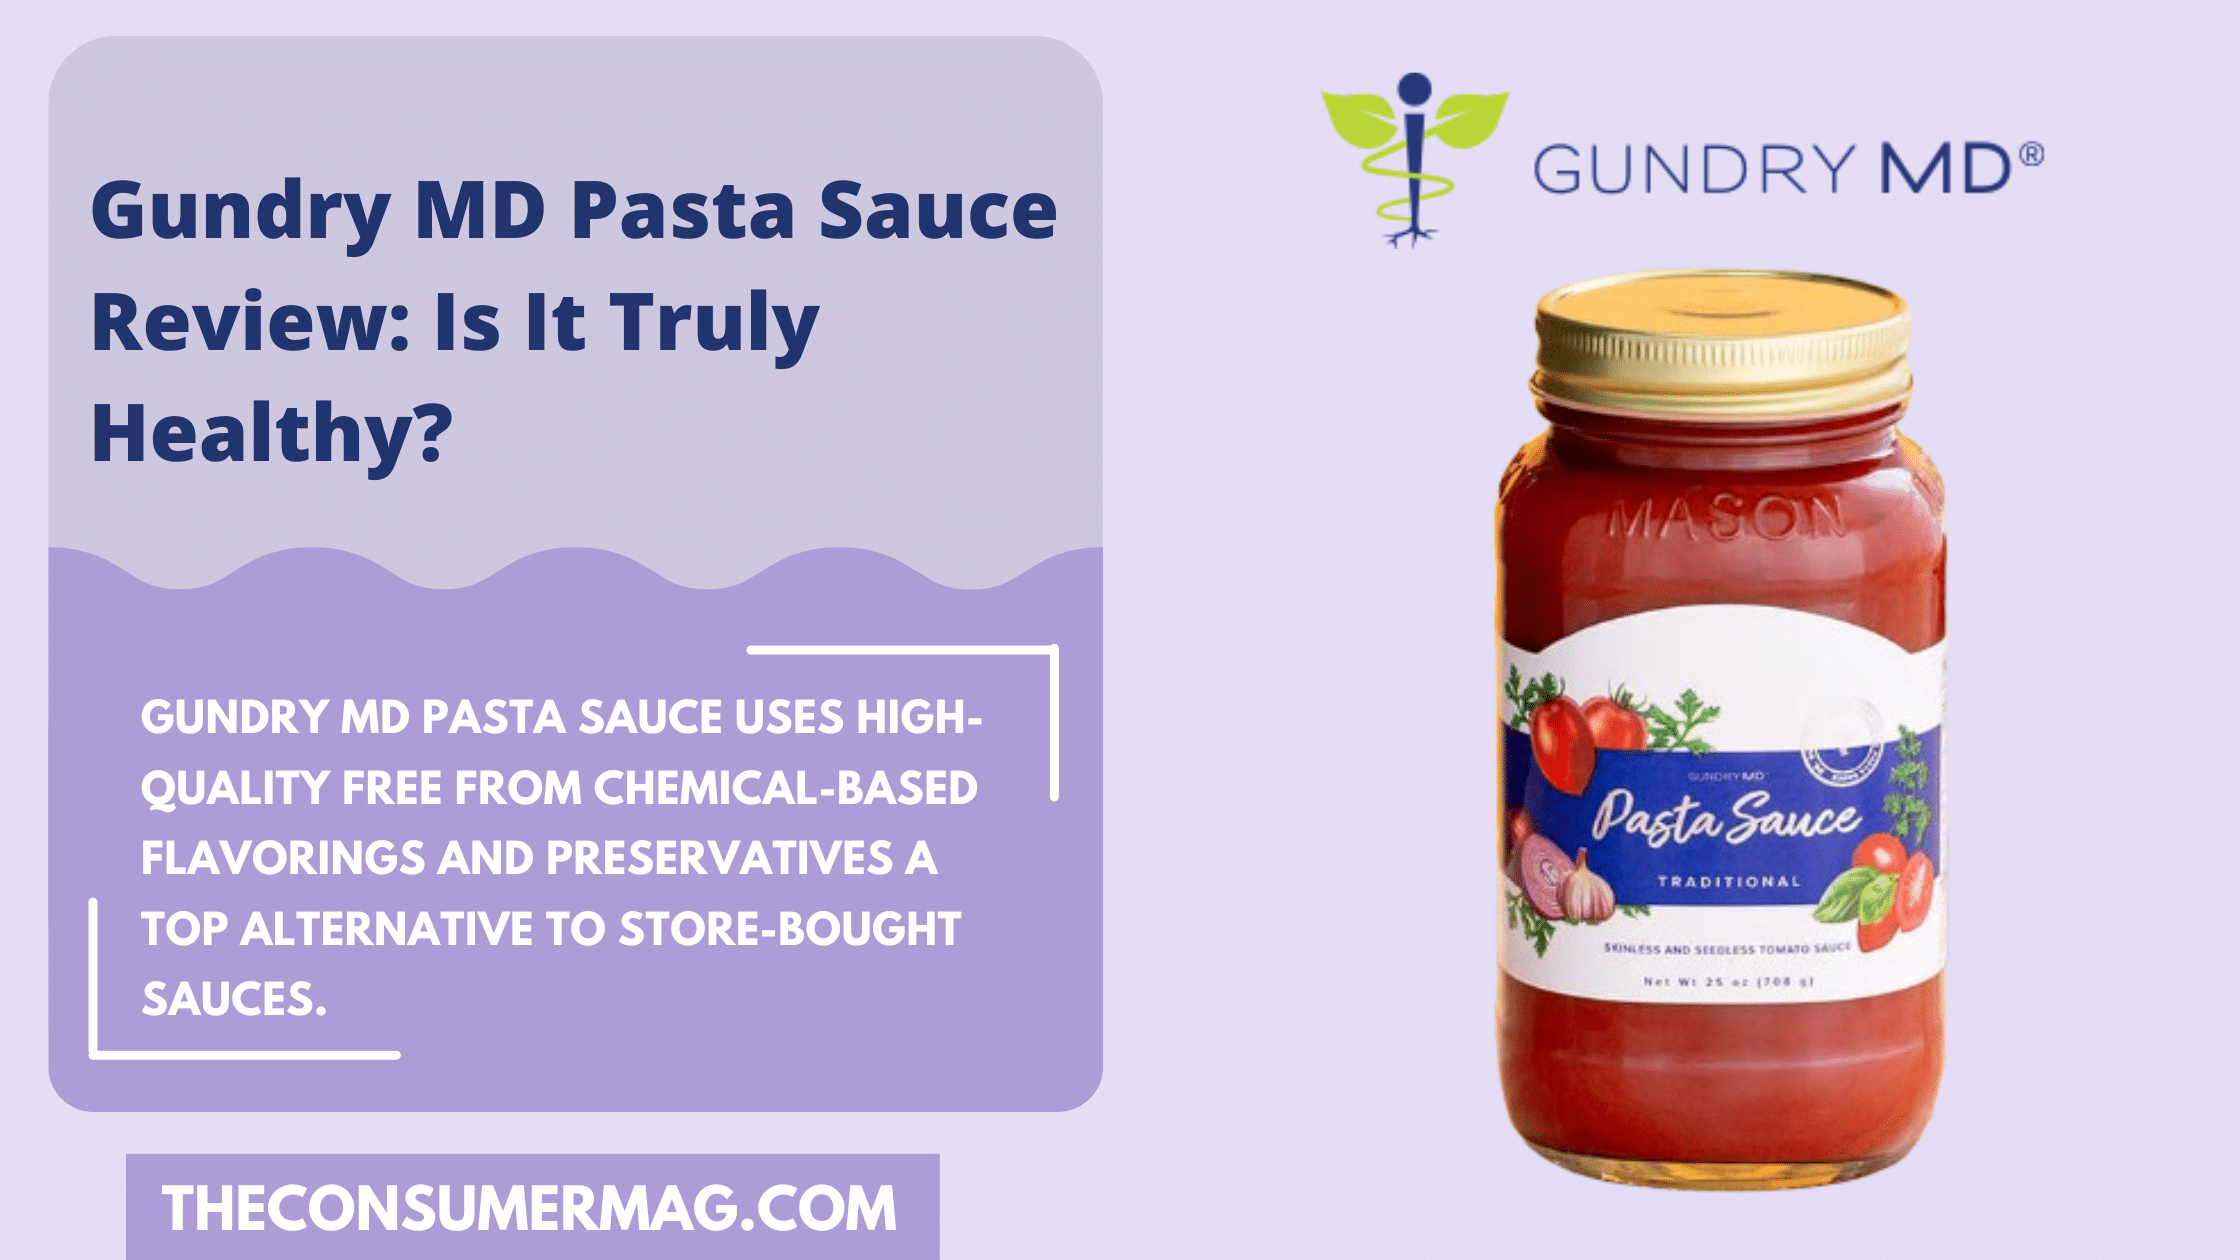 Gundry MD Pasta Sauce Review: Is It Truly Healthy?